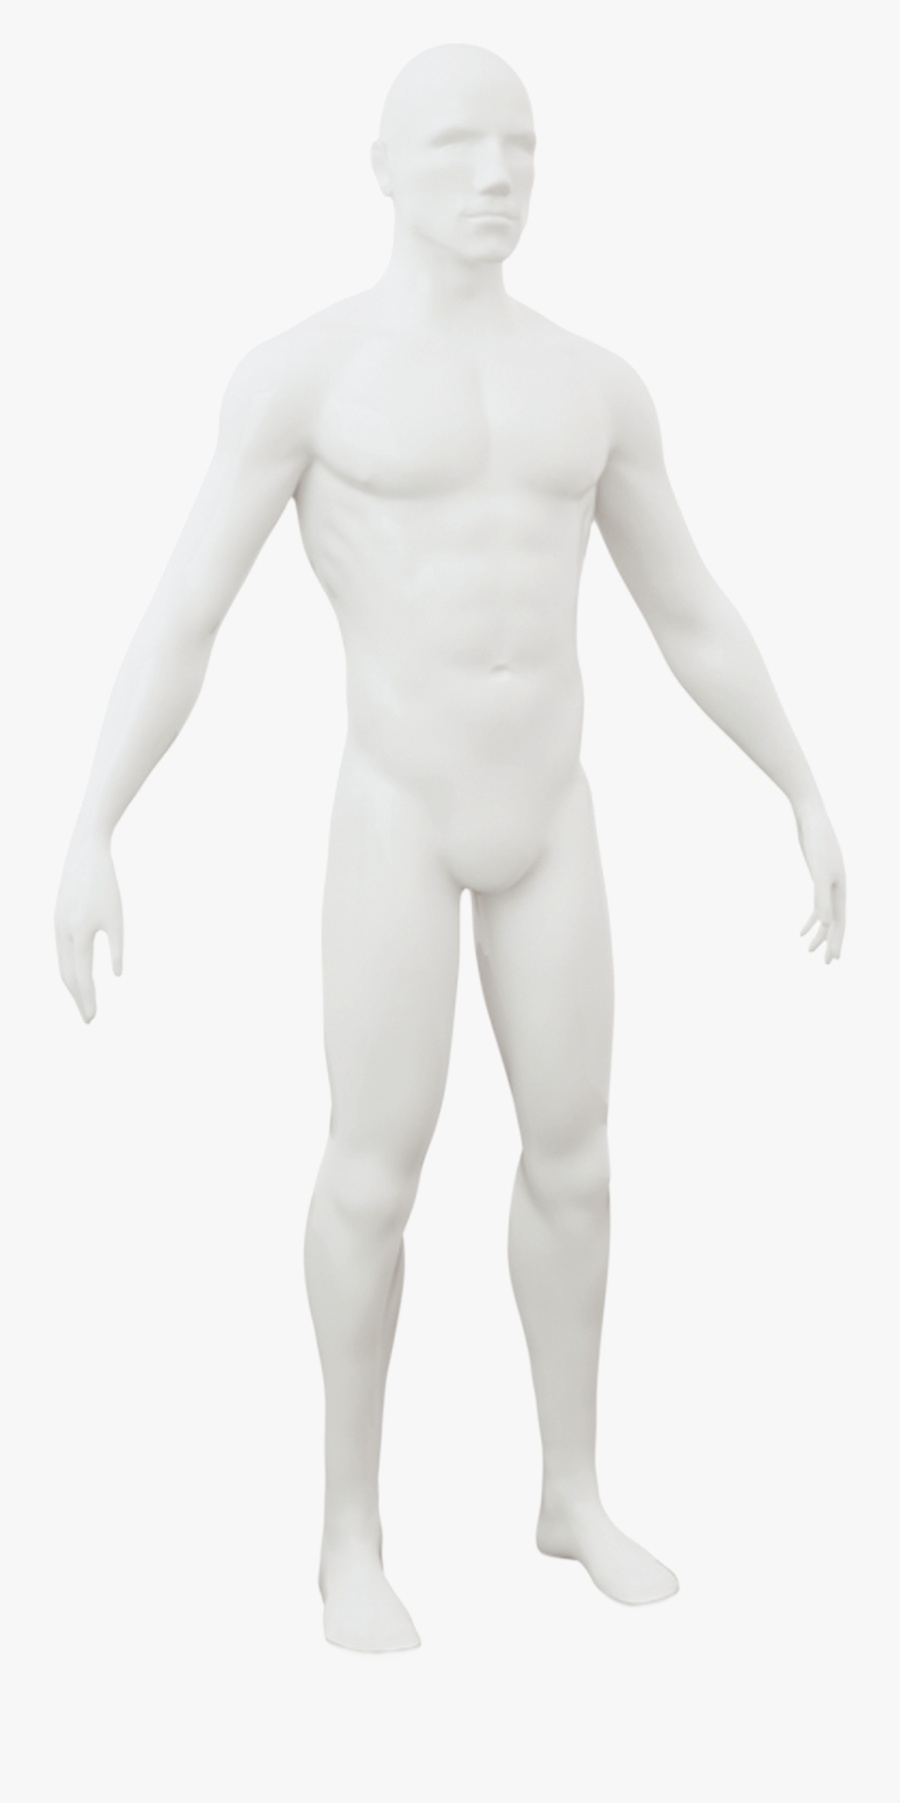 Front Image - Barechested, Transparent Clipart